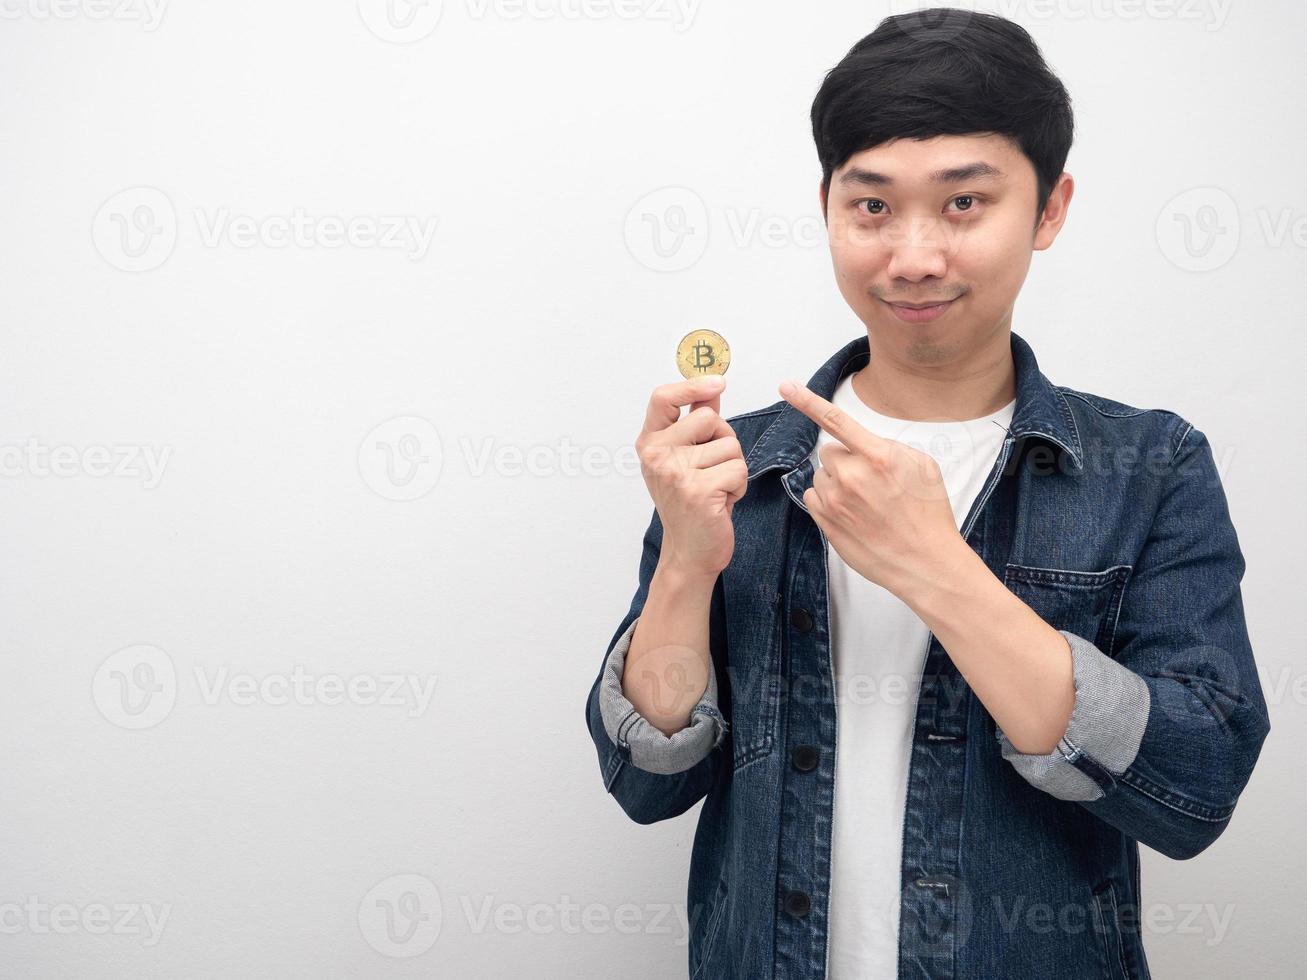 Man jeans shirt point finger at golden bitcoin in hand copy space photo